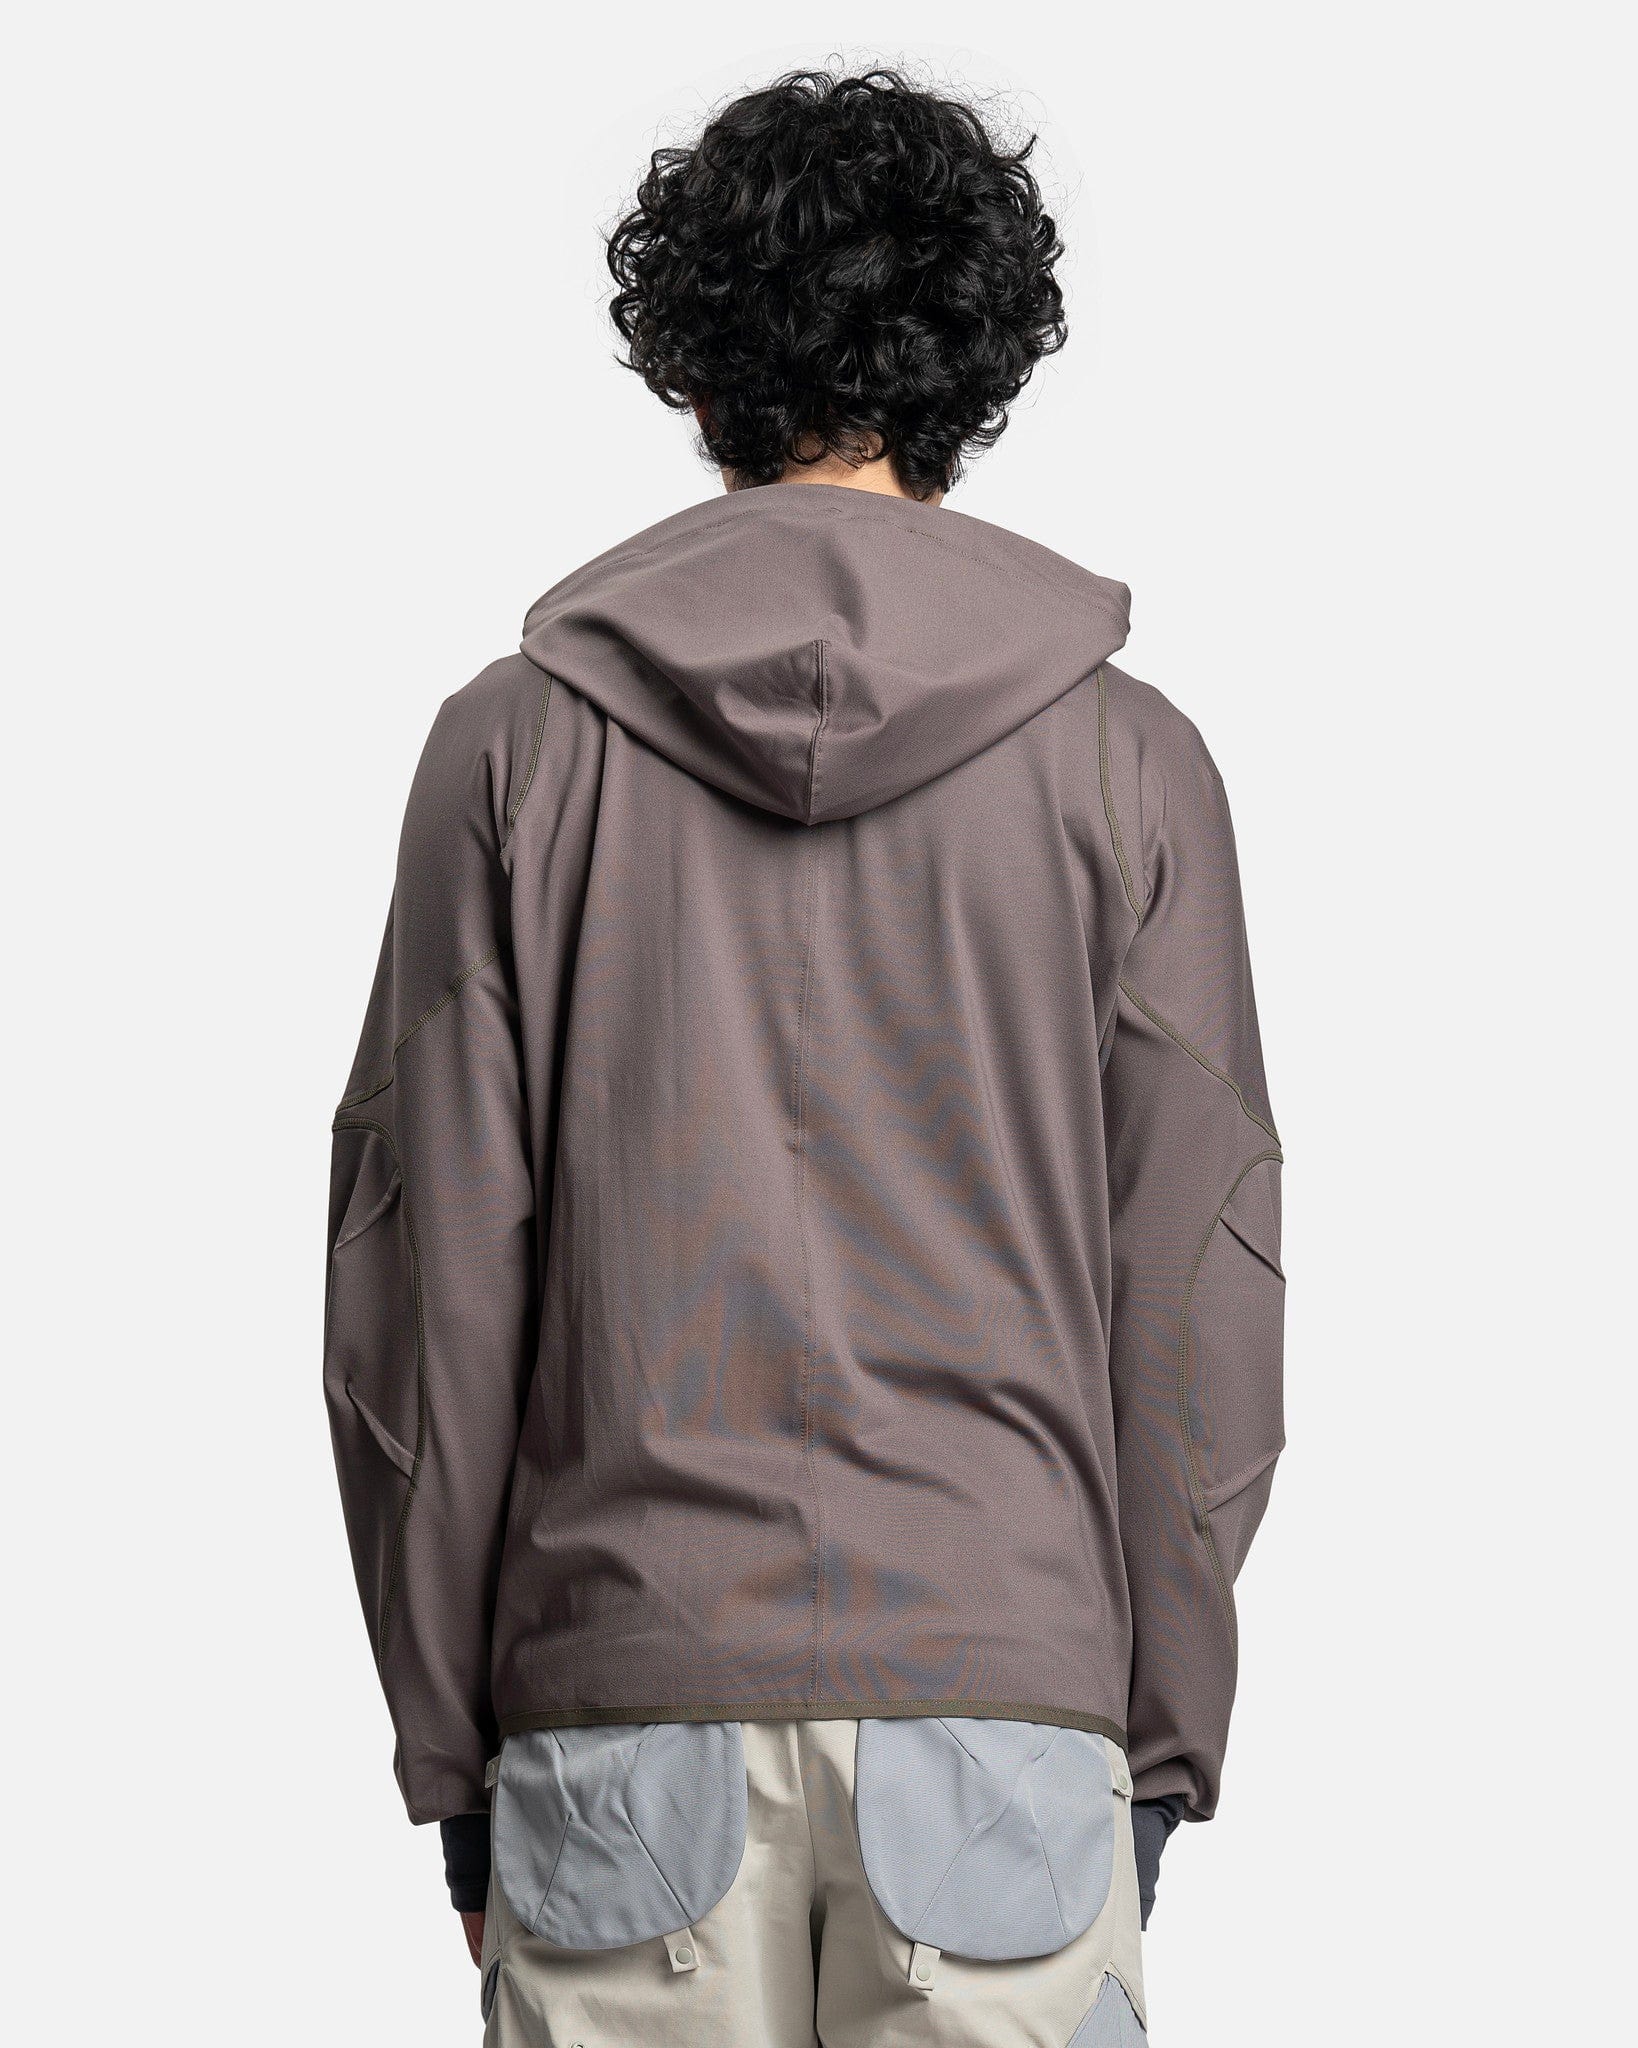 POST ARCHIVE FACTION (P.A.F) Men's Sweatshirts 5.0 Hoodie Right in Olive Green